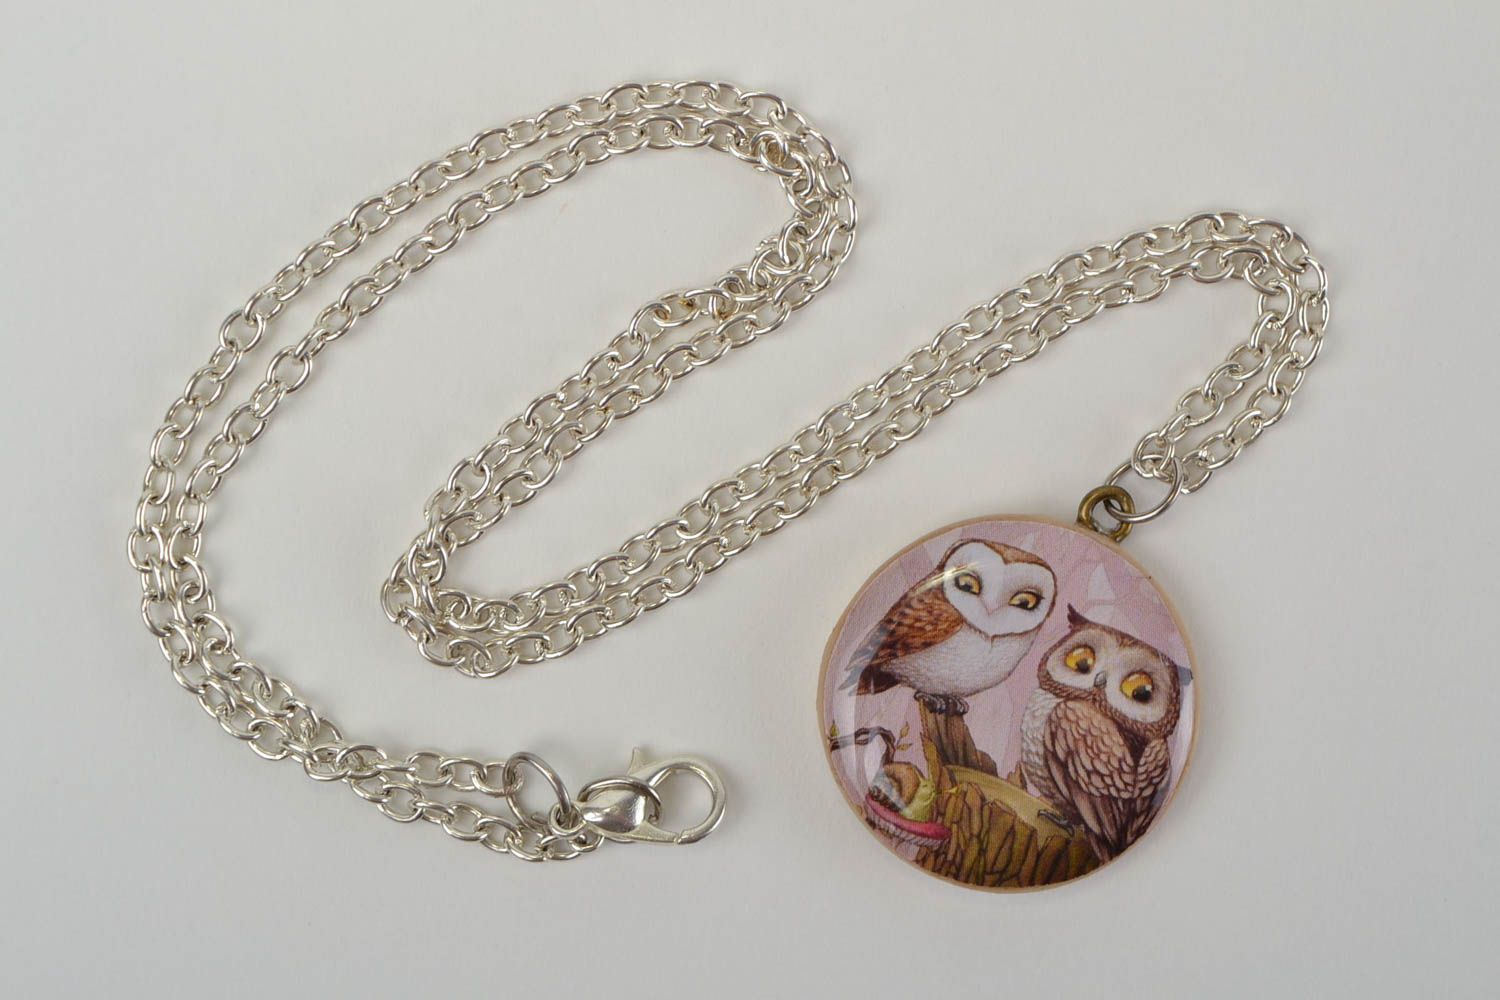 Handmade round decoupage polymer clay designer pendant with owls image on chain photo 3